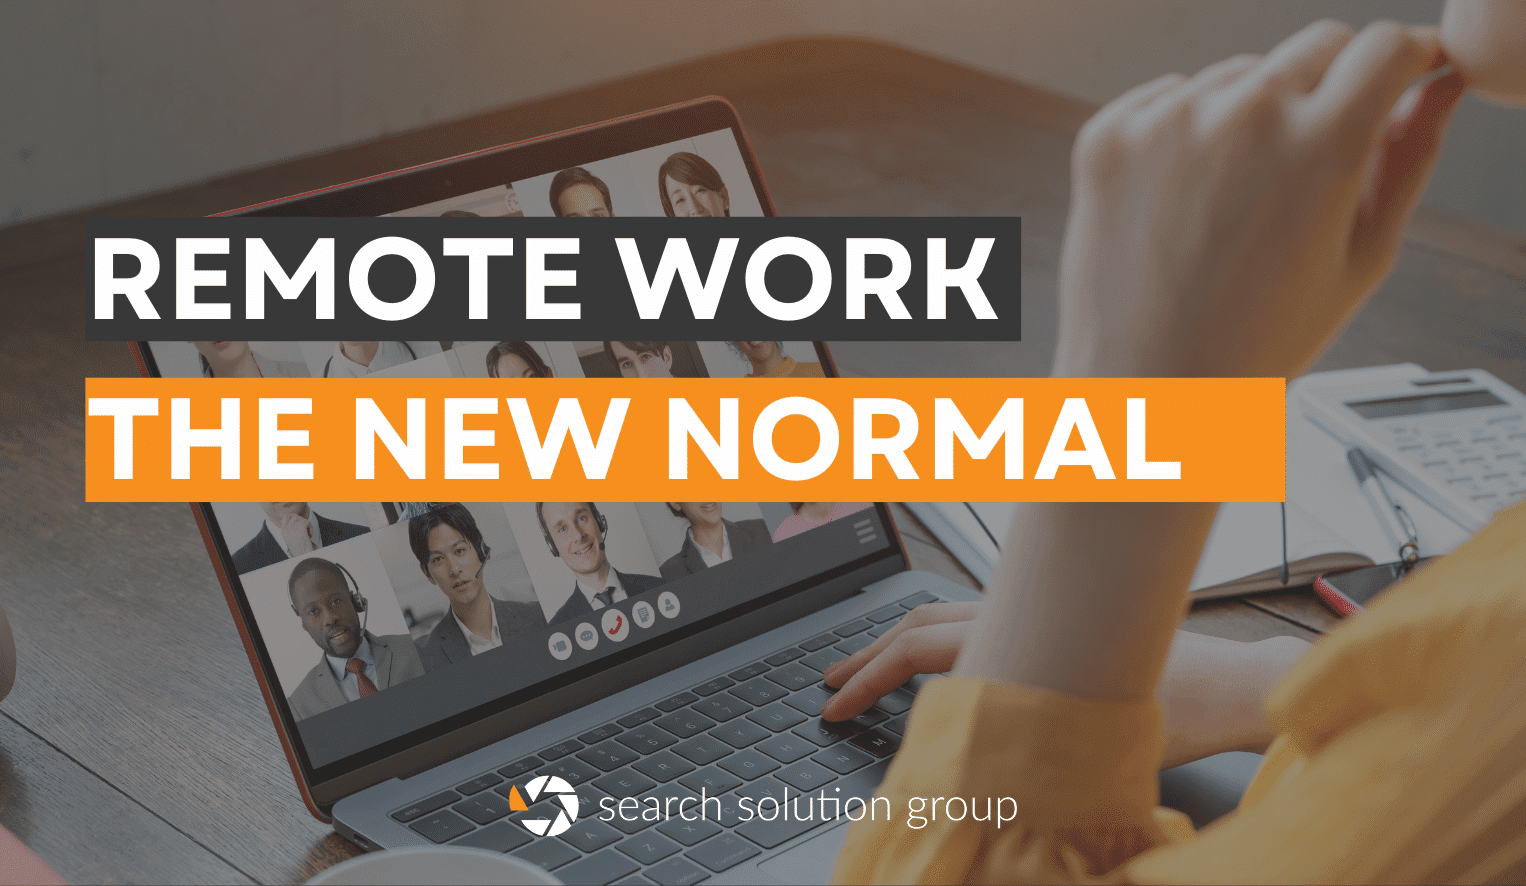 Remote Work, The New Normal